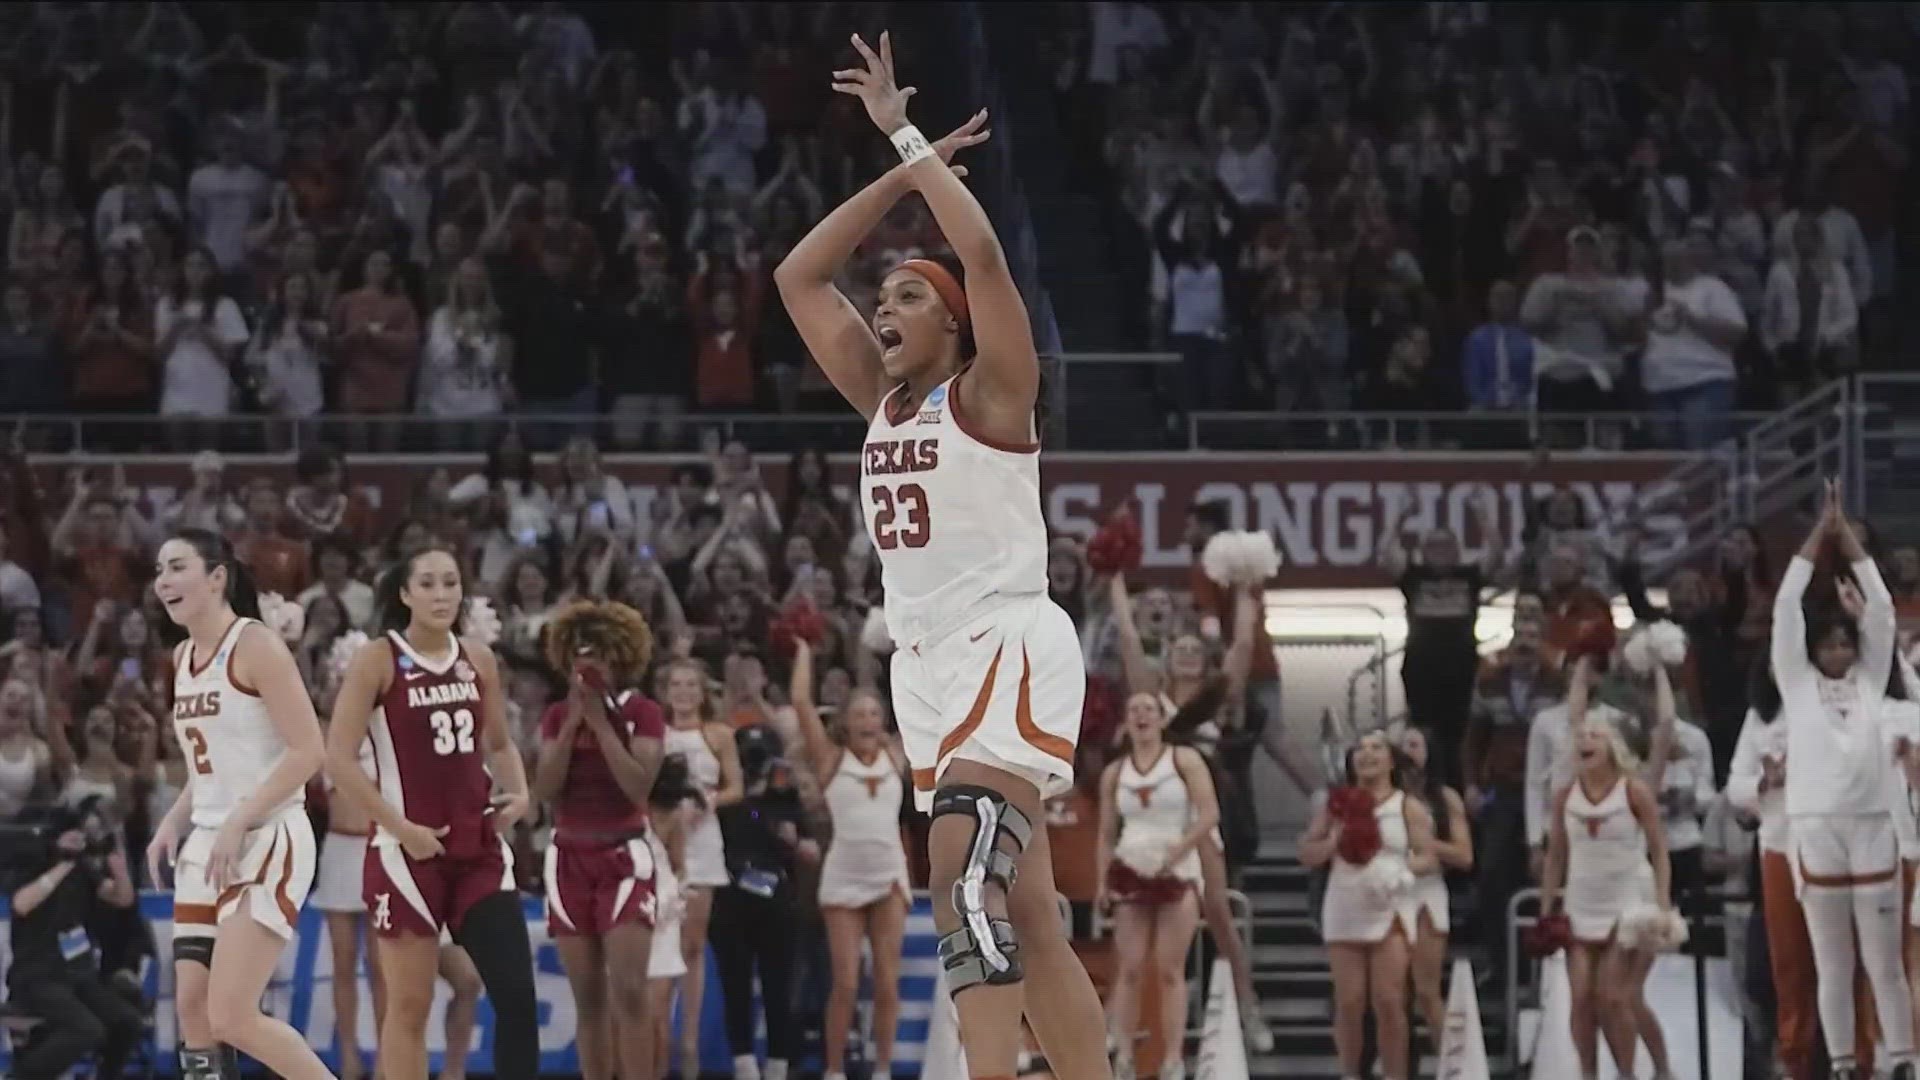 The Longhorns women's team will now advance to the next round of March Madness.